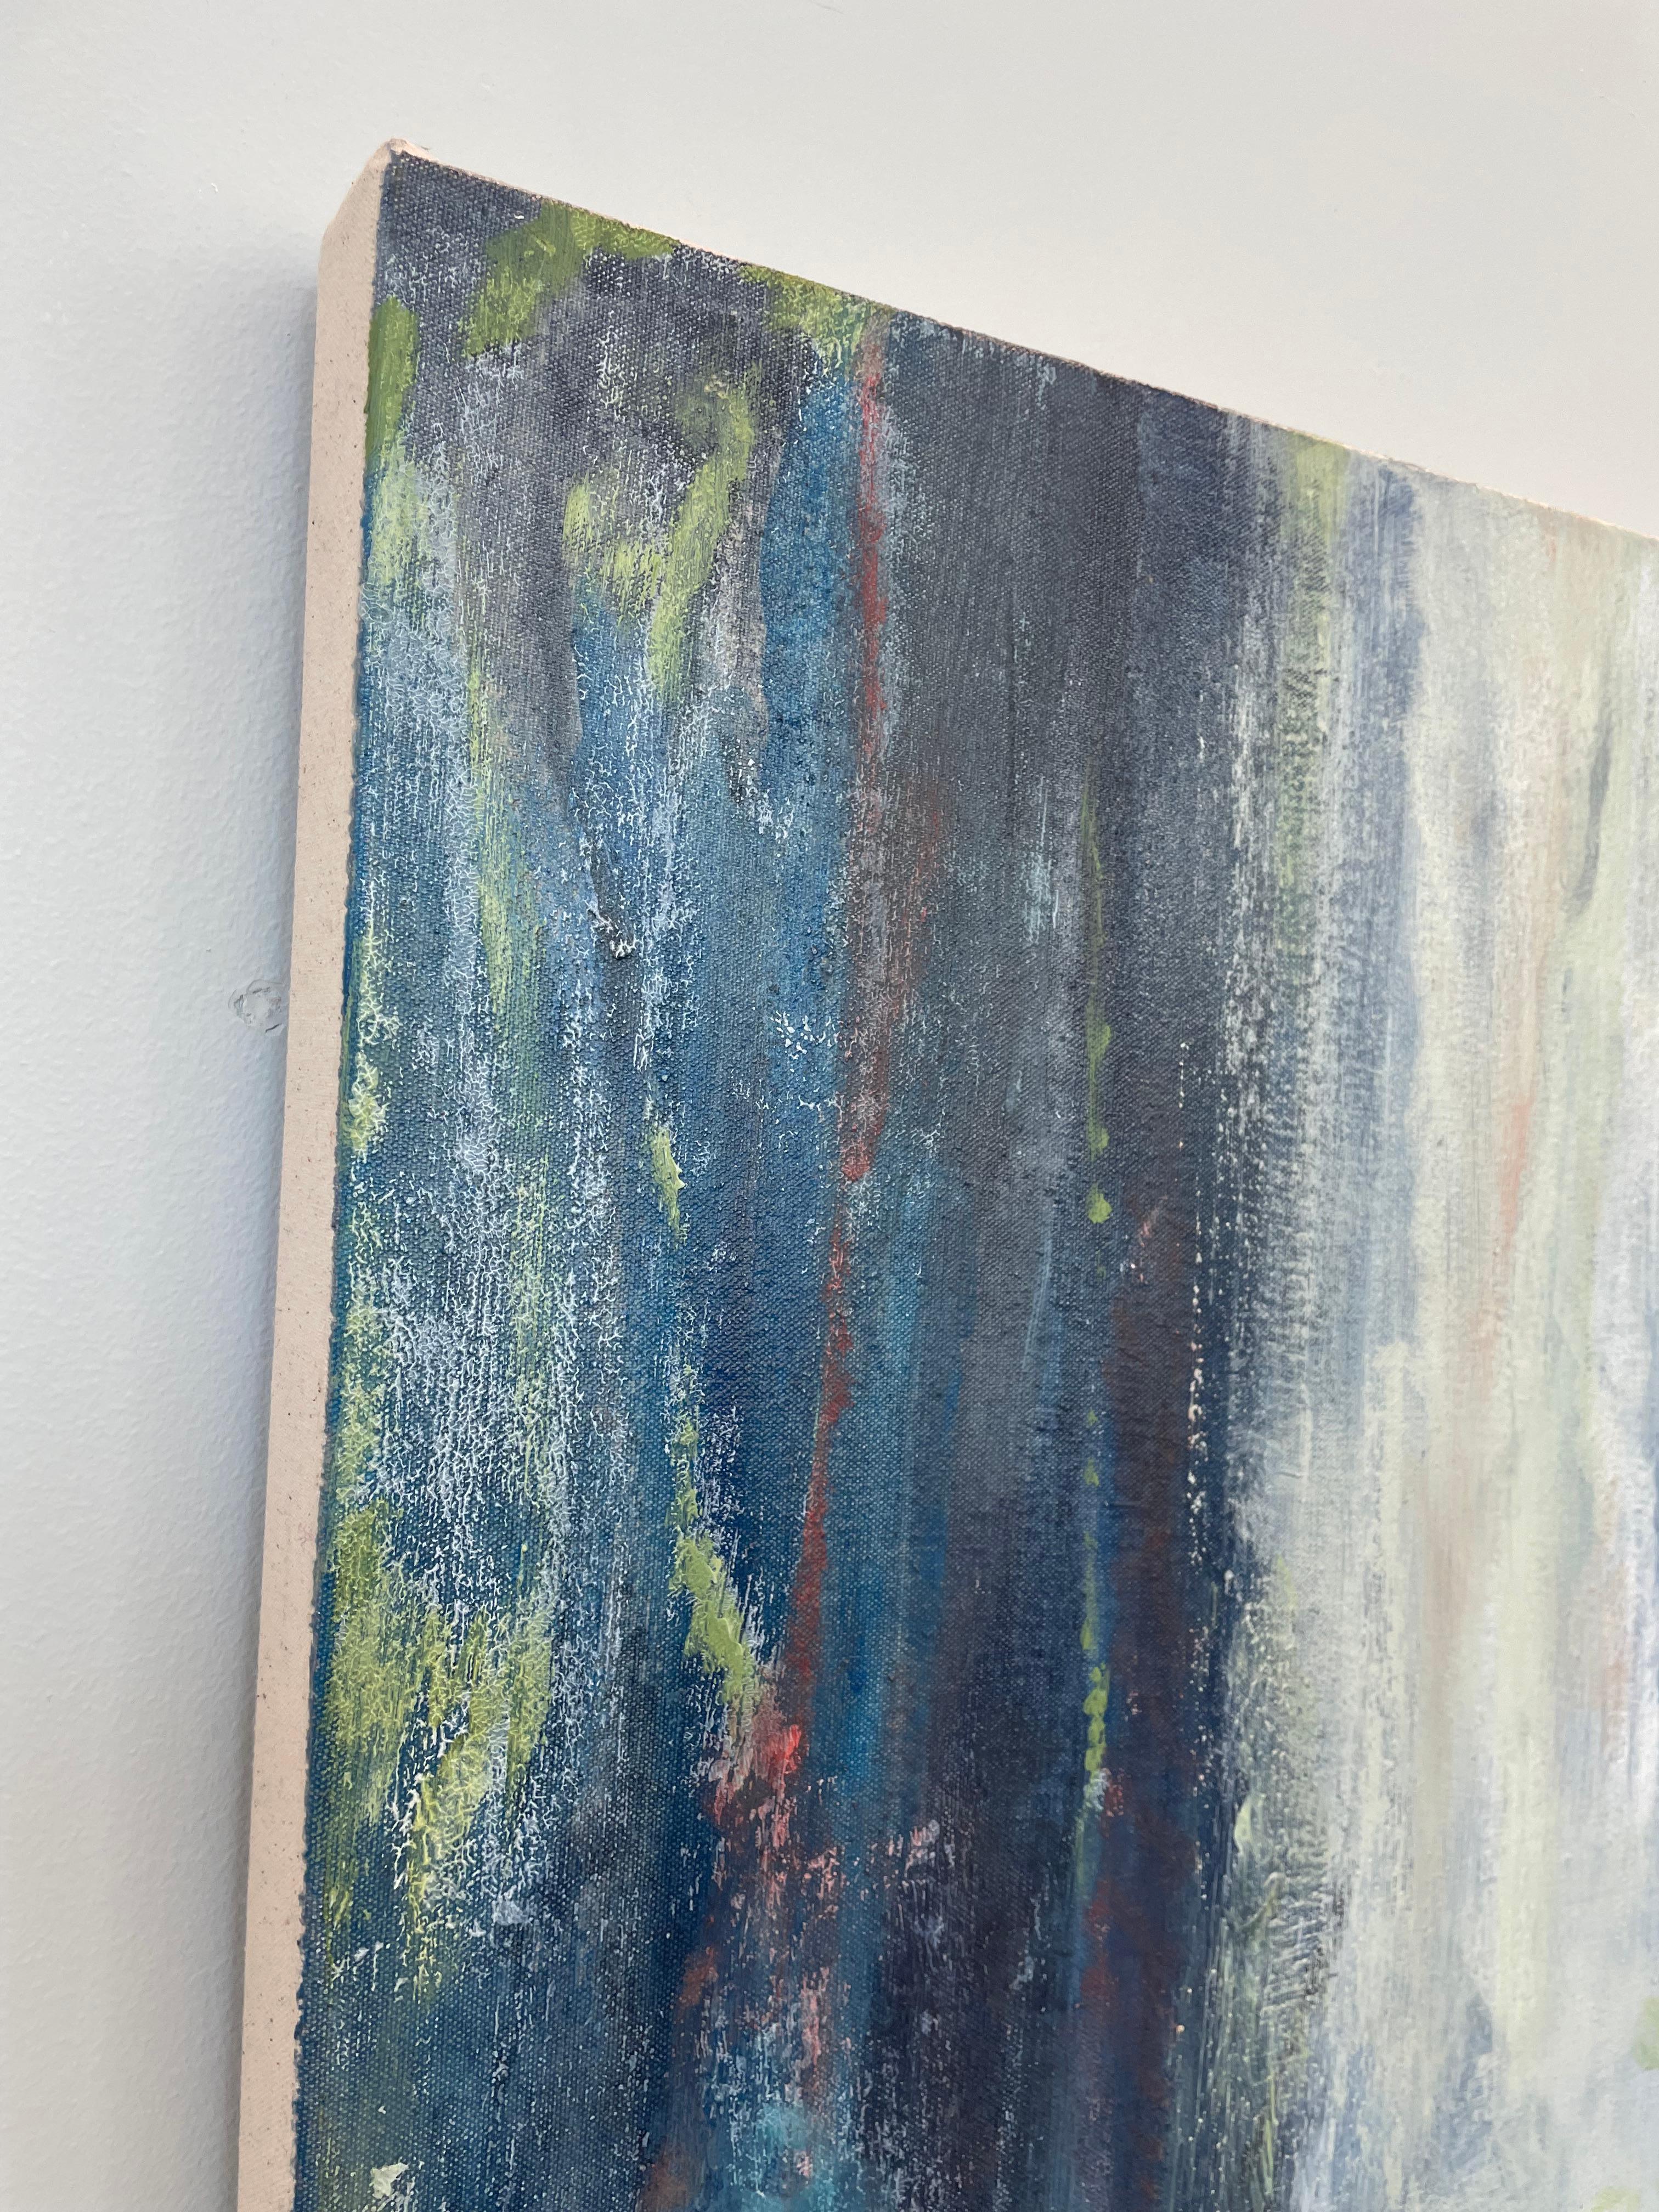 ON THE WING - Large gestural abstract painting in shades of blue 3